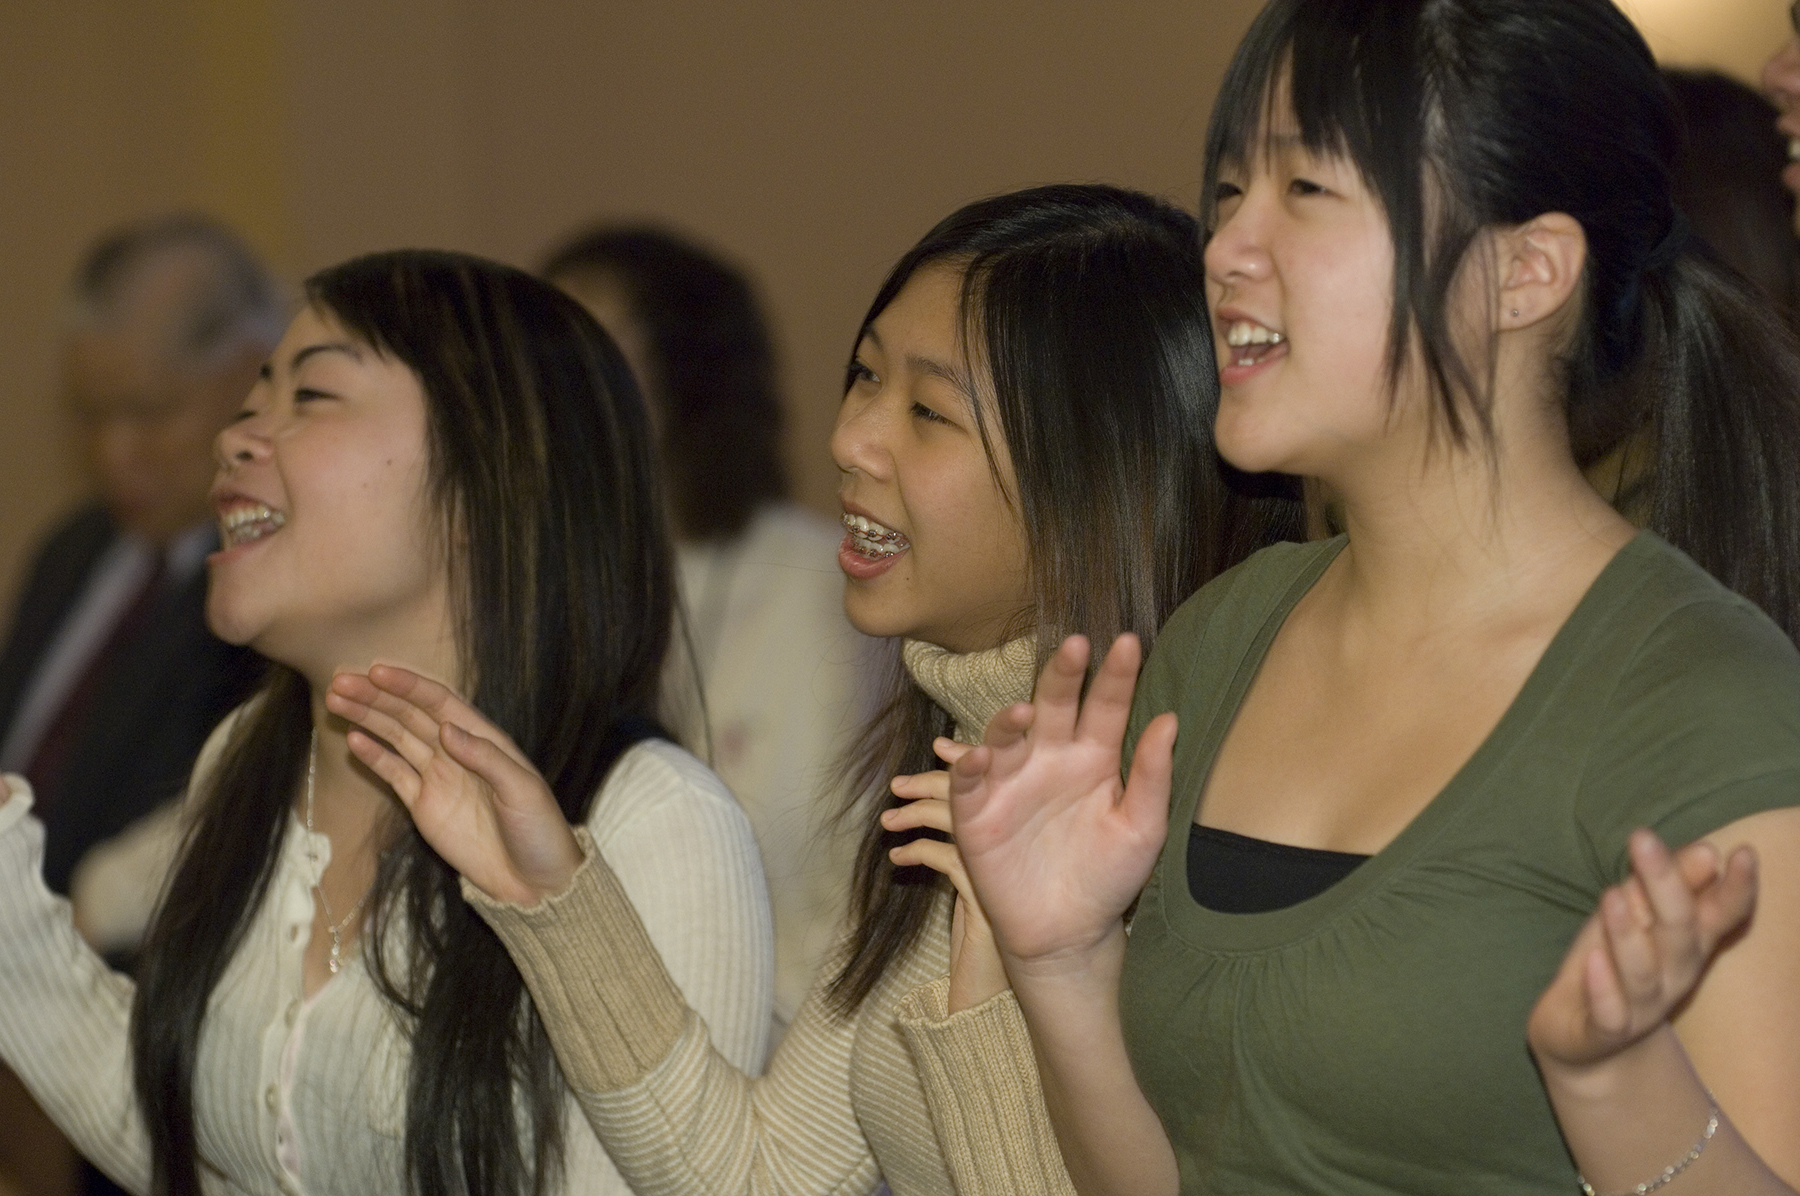 A group of Asian descent people singing and raising hands